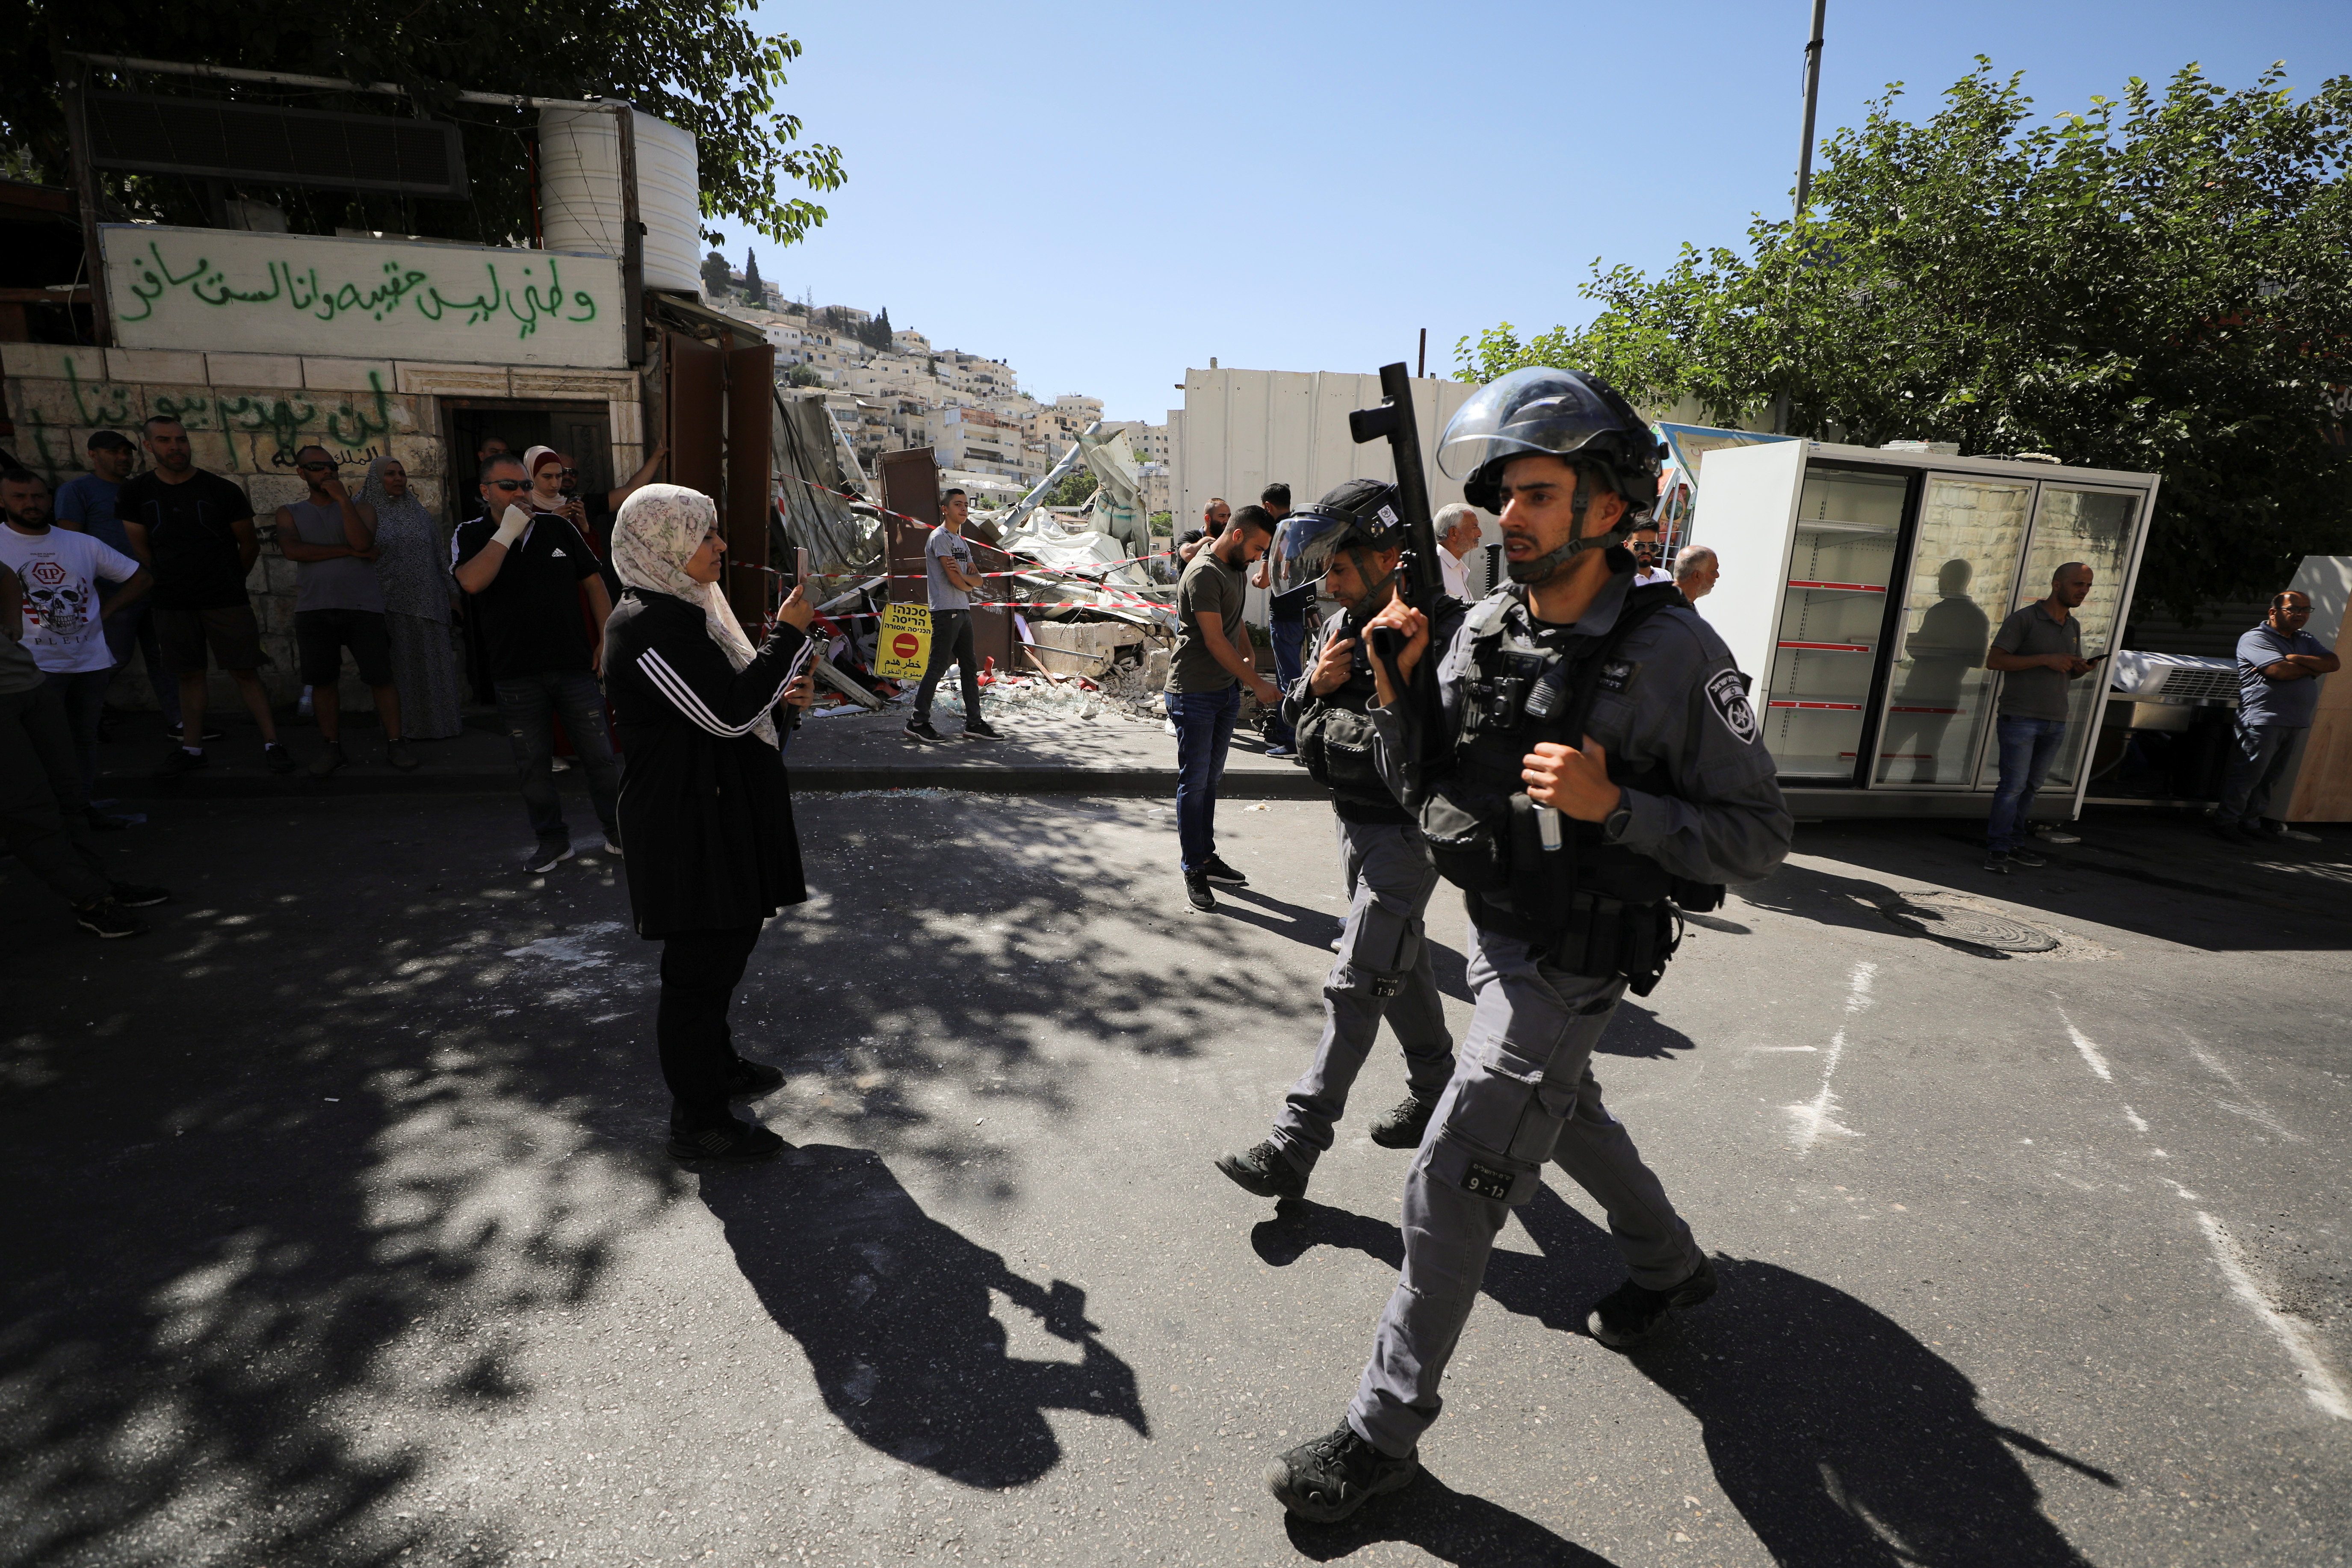 An Israeli security force member holds his weapon during clashes with Palestinians which erupted over Israel's demolition of a shop in the Palestinian neighbourhood of Silwan in East Jerusalem